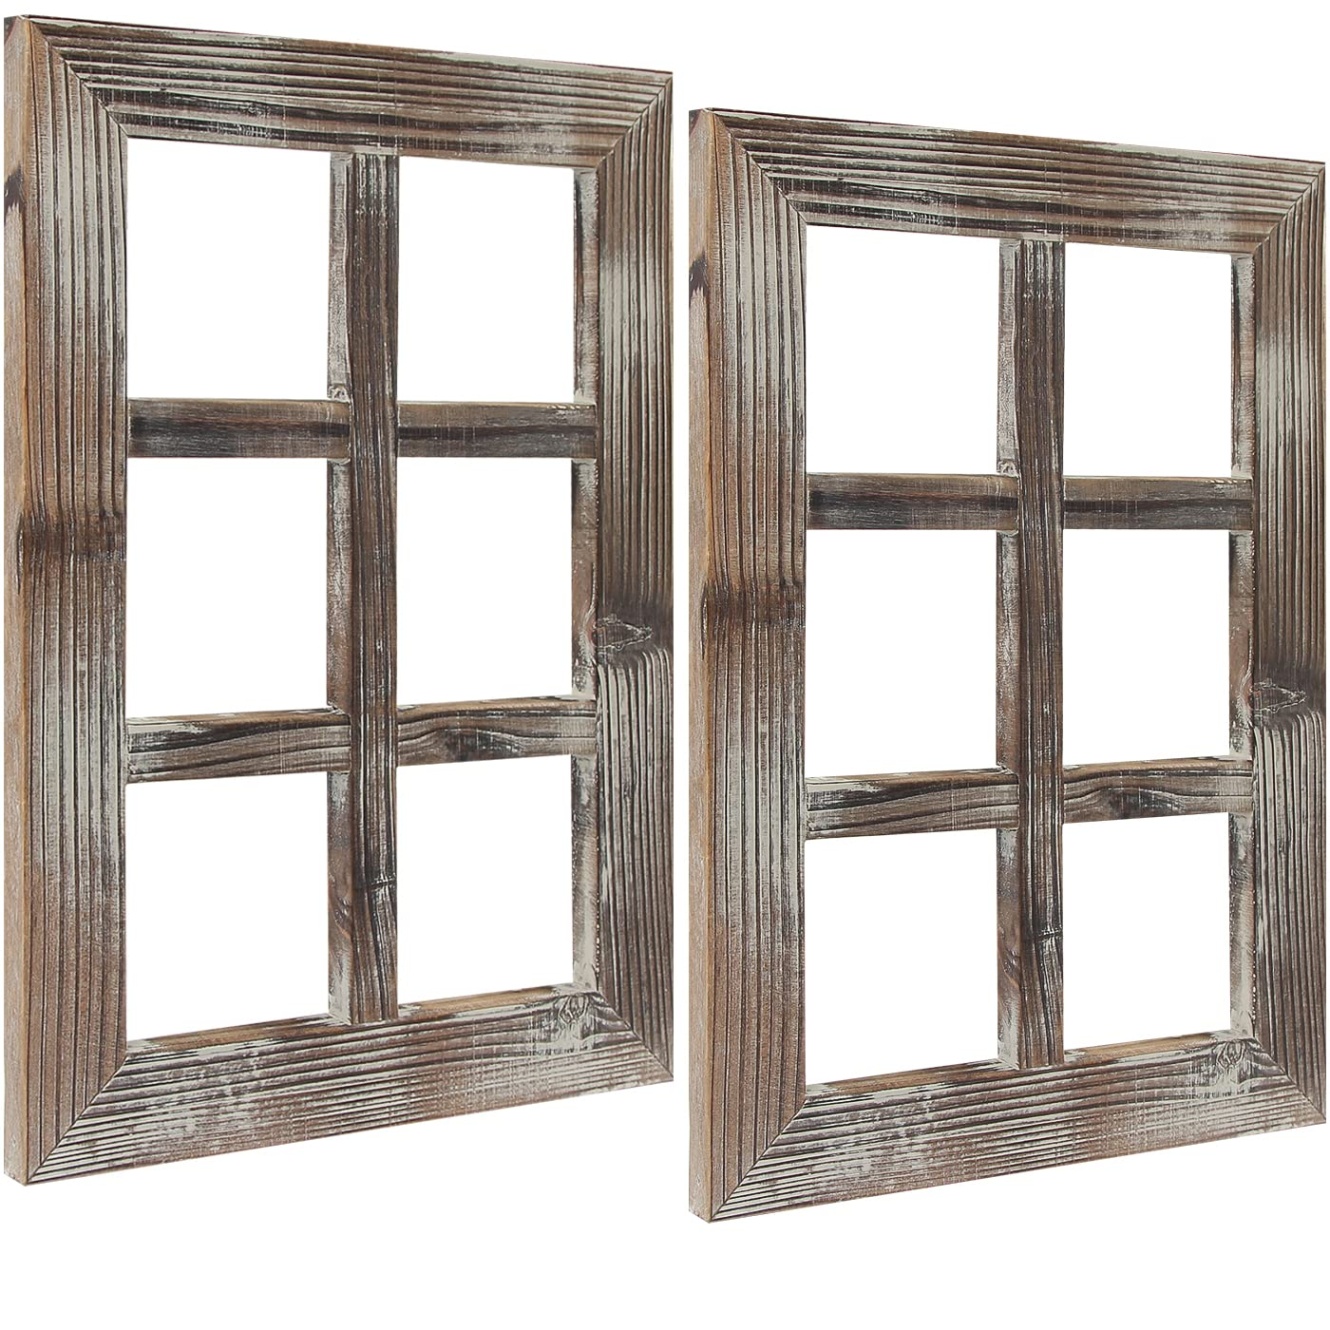 decoration window frame Niche Utama Home J JACKCUBE DESIGN Rustic wood Window Frame Set of  Farmhouse Wall Decor  Window Picture Frames for Living room Bedroom Kitchen Home Decorations -